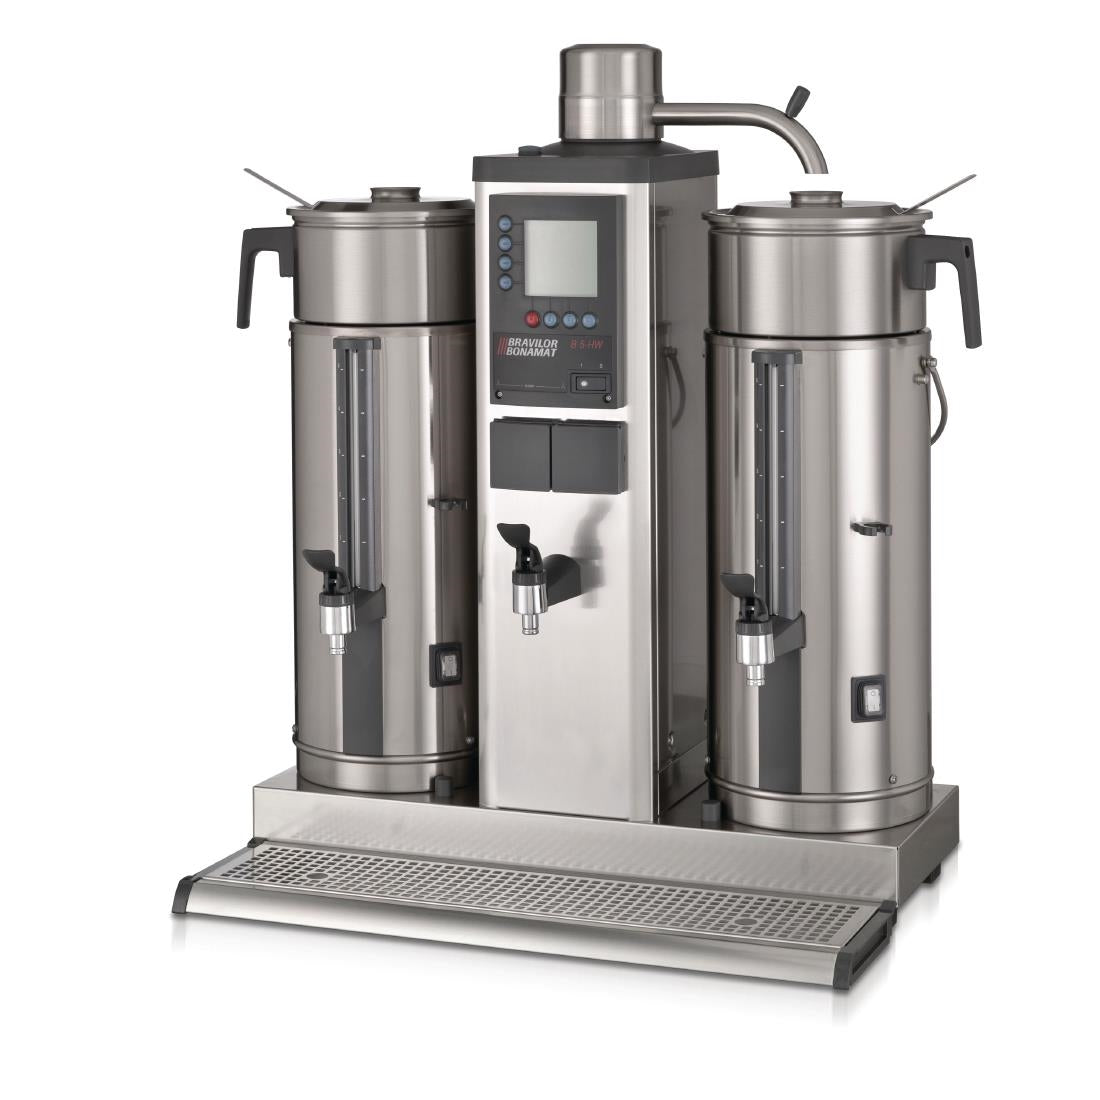 DC687-3P Bravilor B5 HW Bulk Coffee Brewer with 2x5Ltr Coffee Urns and Hot Water Tap Three Phase JD Catering Equipment Solutions Ltd